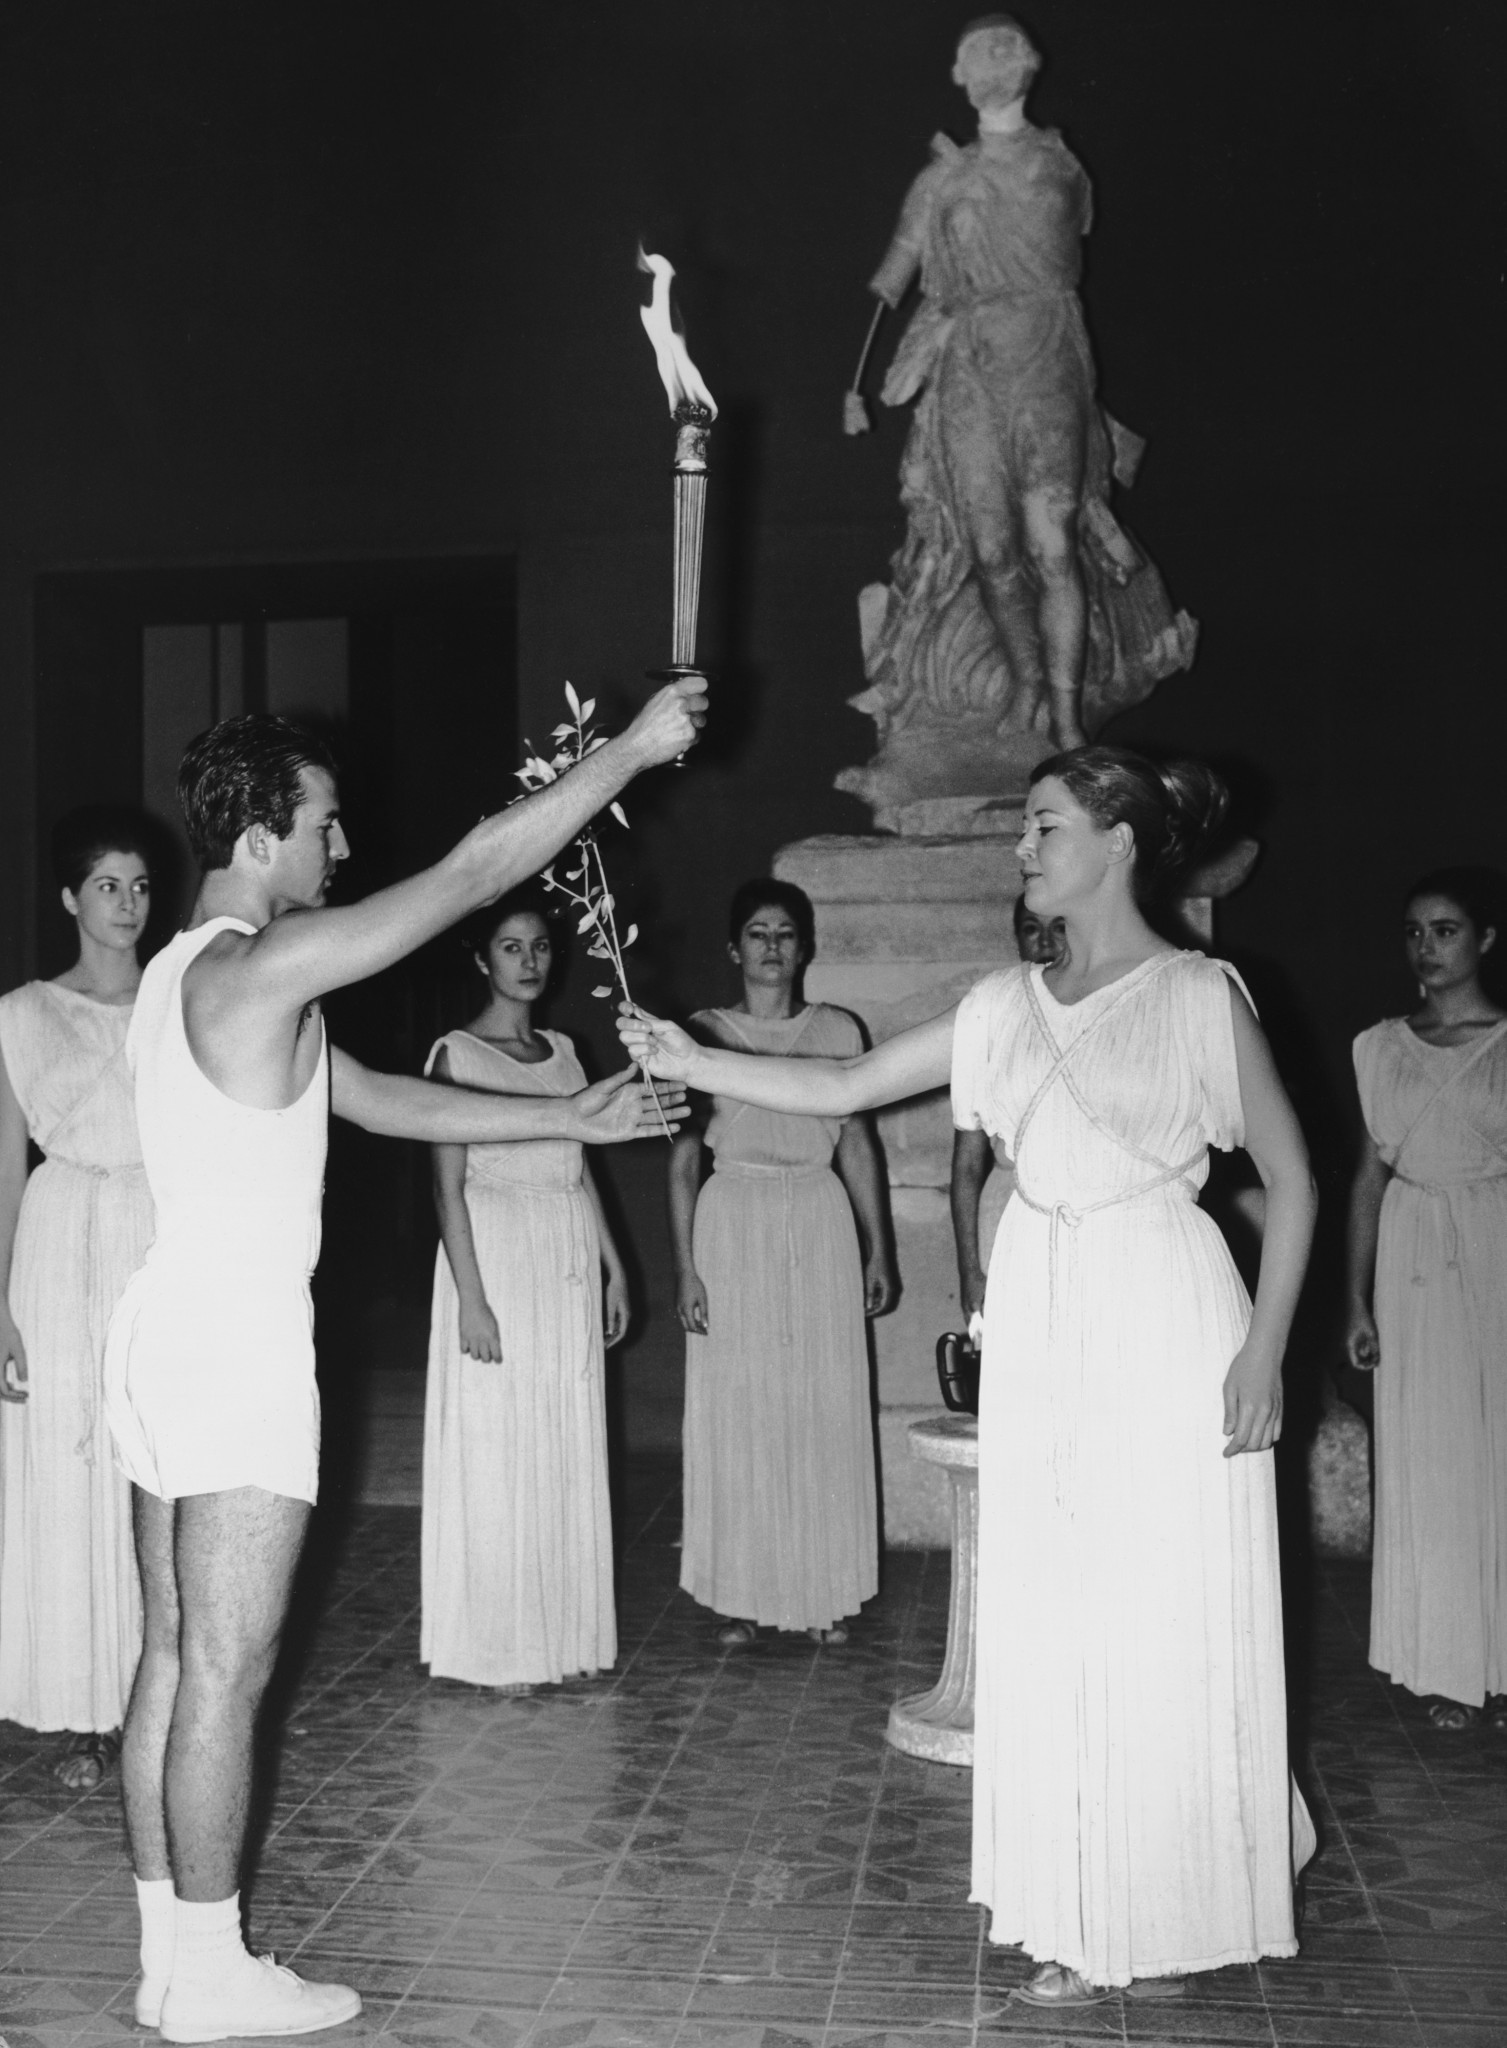 Bad weather forced organisers to conduct the start of Grenoble 1968 Torch Relay inside the archaeological museum in Ancient Olympia ©Getty Images